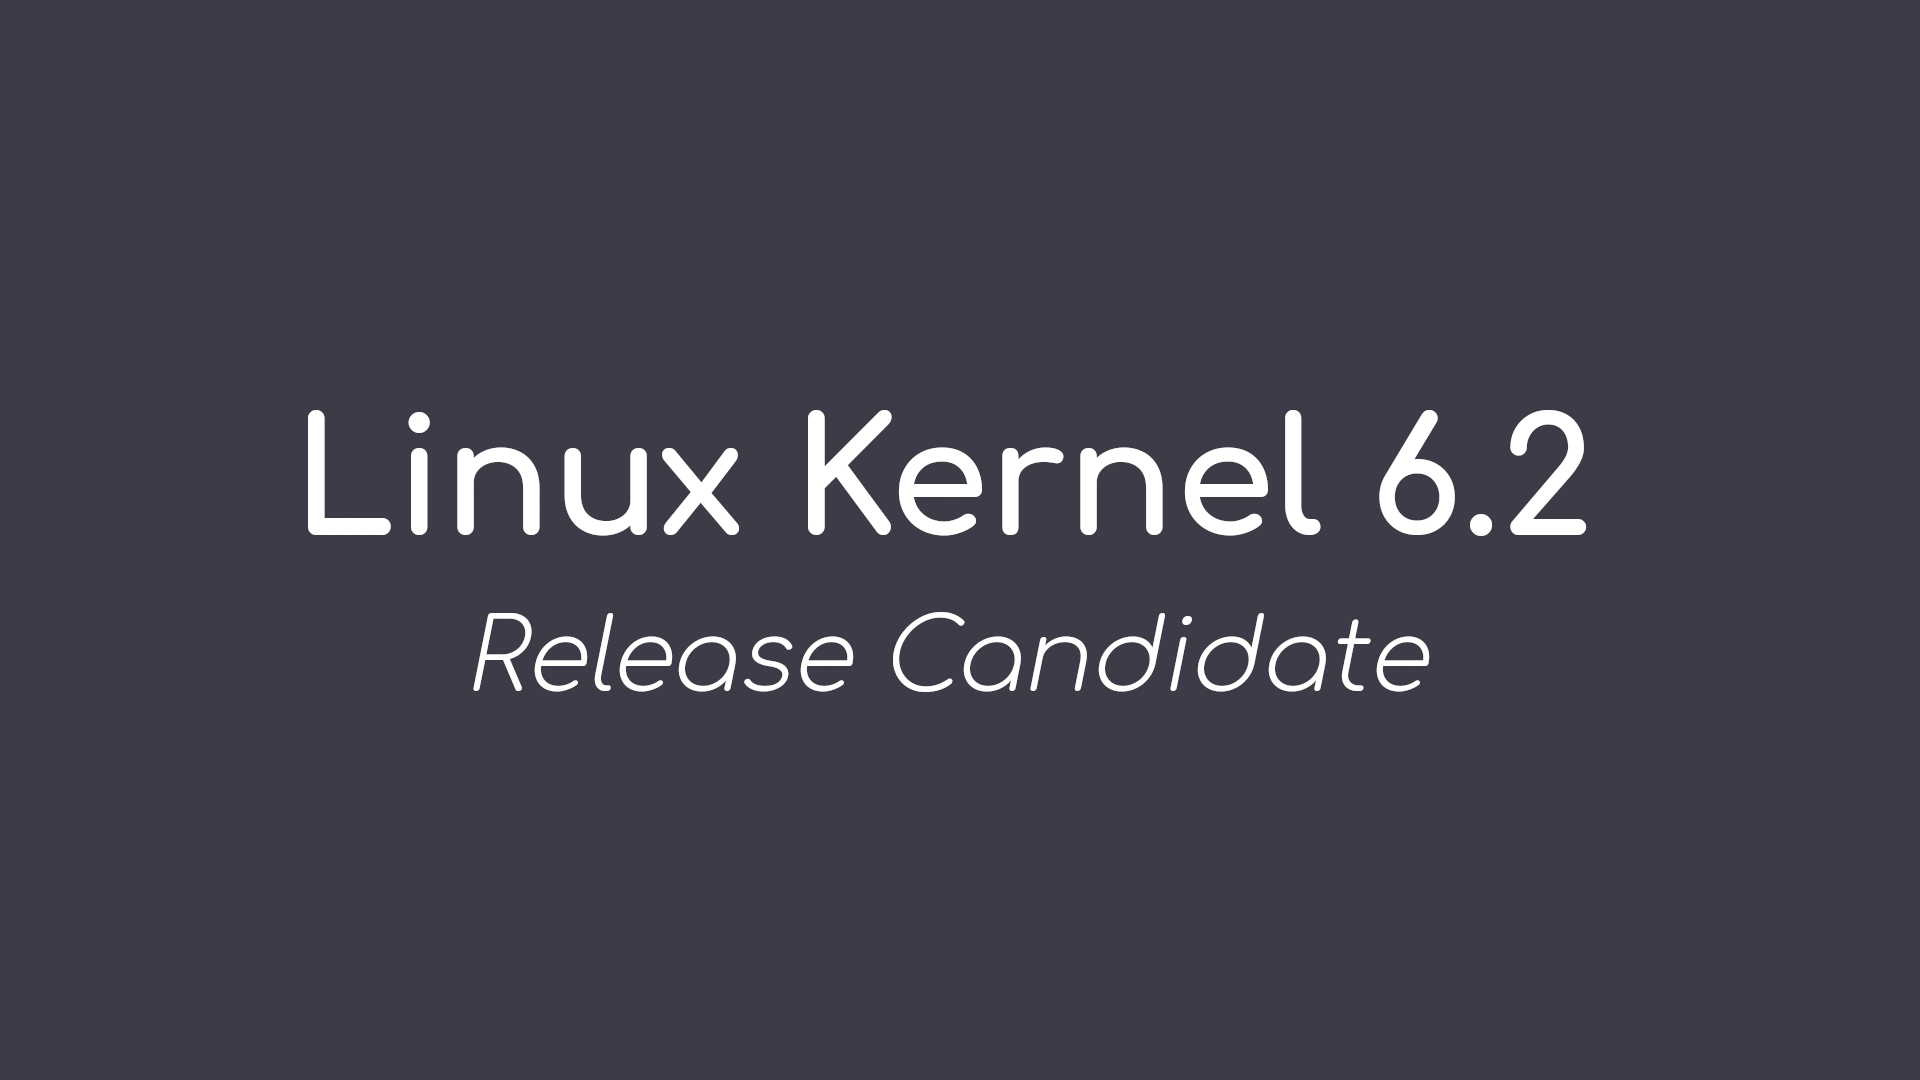 Linus Torvalds Announces First Linux Kernel 6.2 Release Candidate